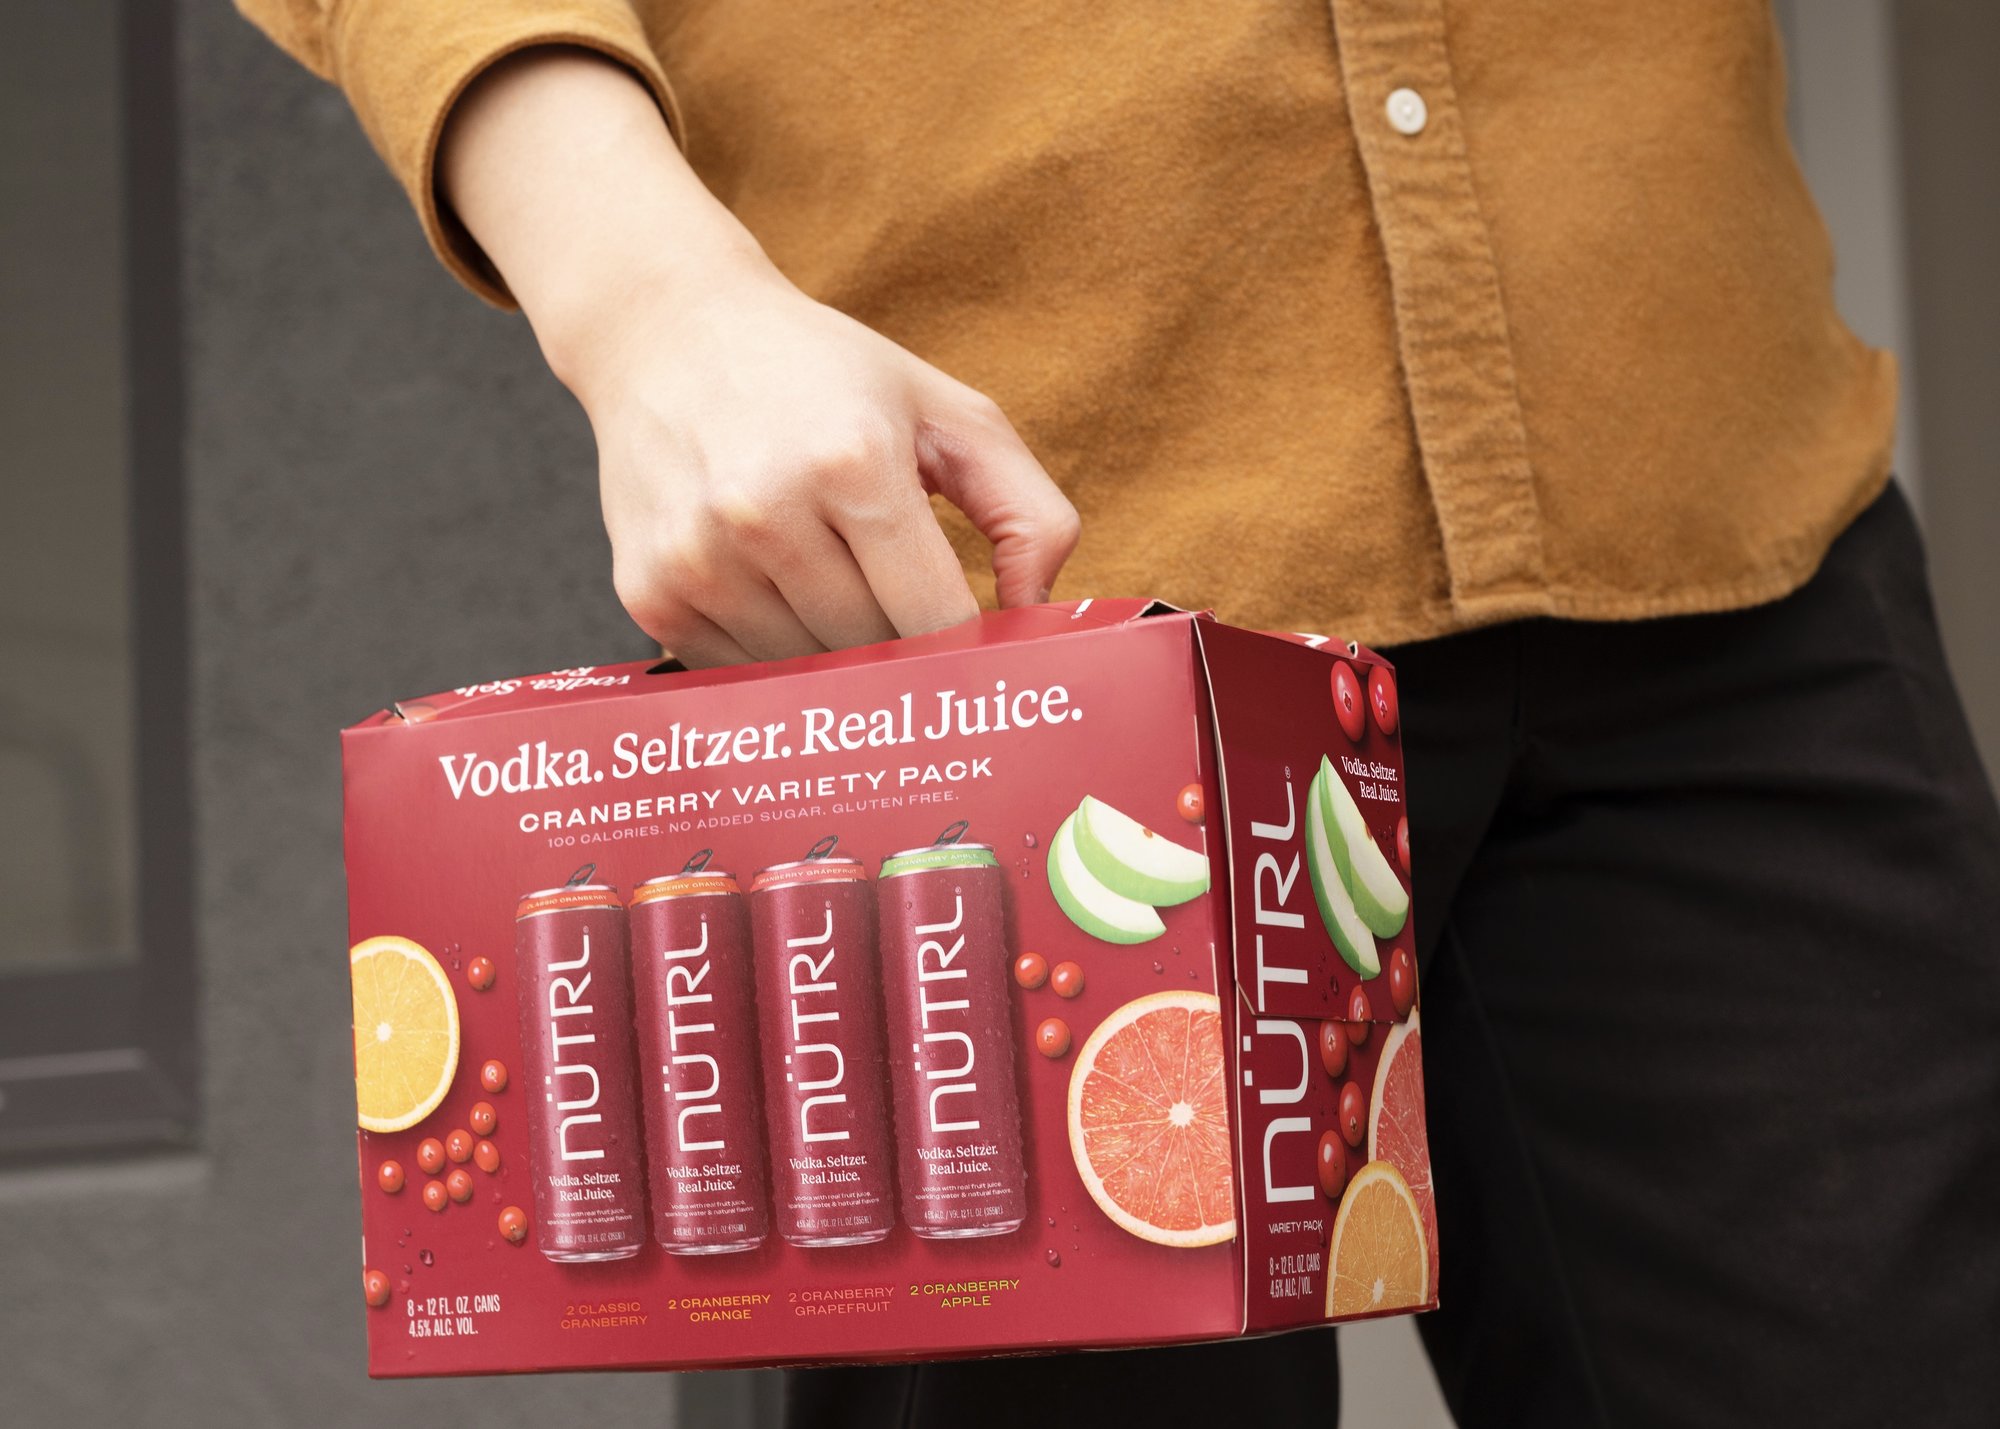 GET READY FOR A NEW FALL FAVORITE: NÜTRL CRANBERRY VODKA SELTZER NOW AVAILABLE NATIONWIDE